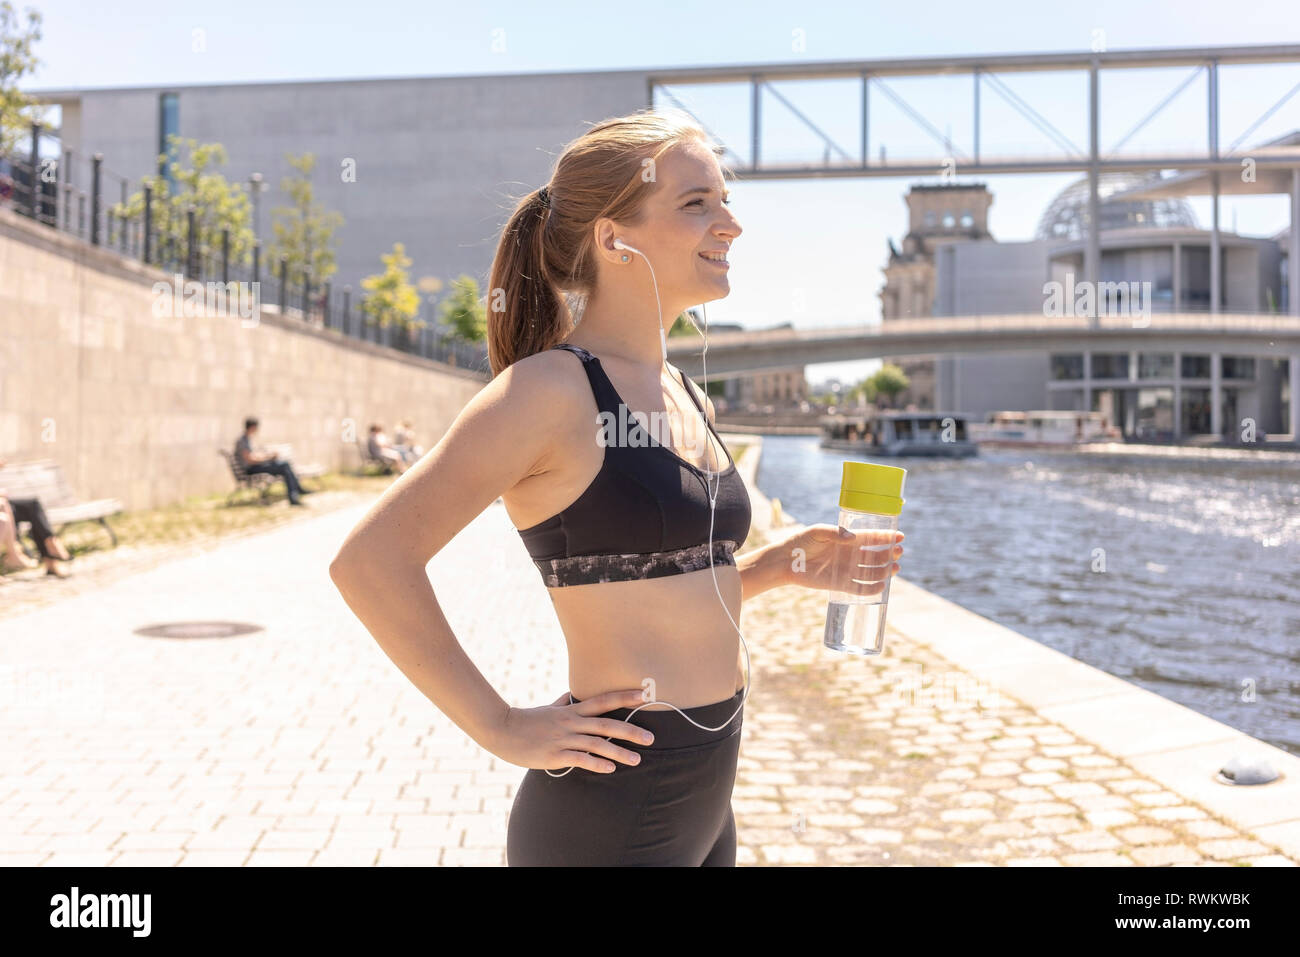 Young woman taking break from exercise in city, Berlin, Germany Stock Photo